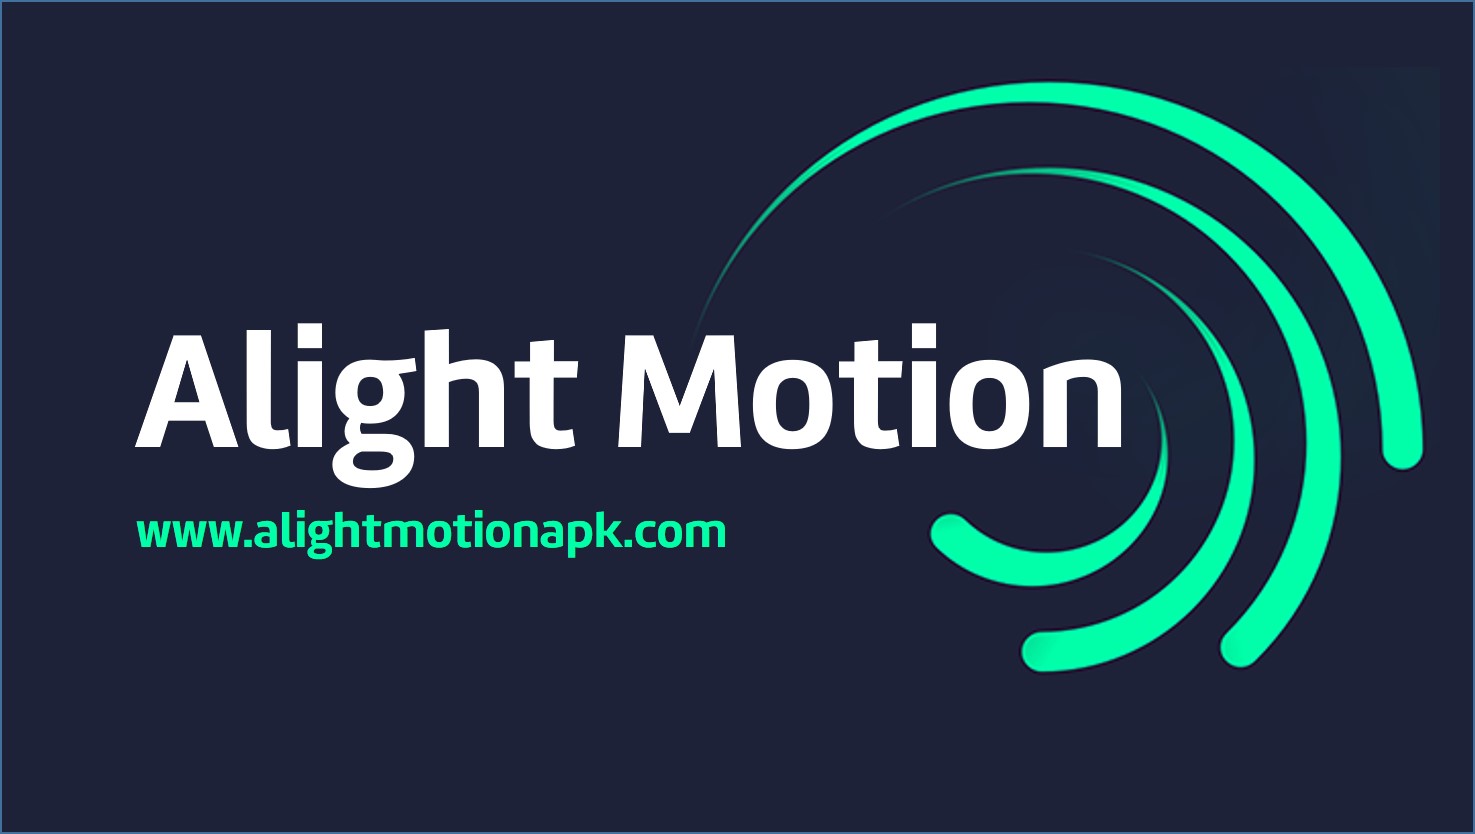 Alight Motion APK 4.3.3 Latest version free Download Android, iOS, PC